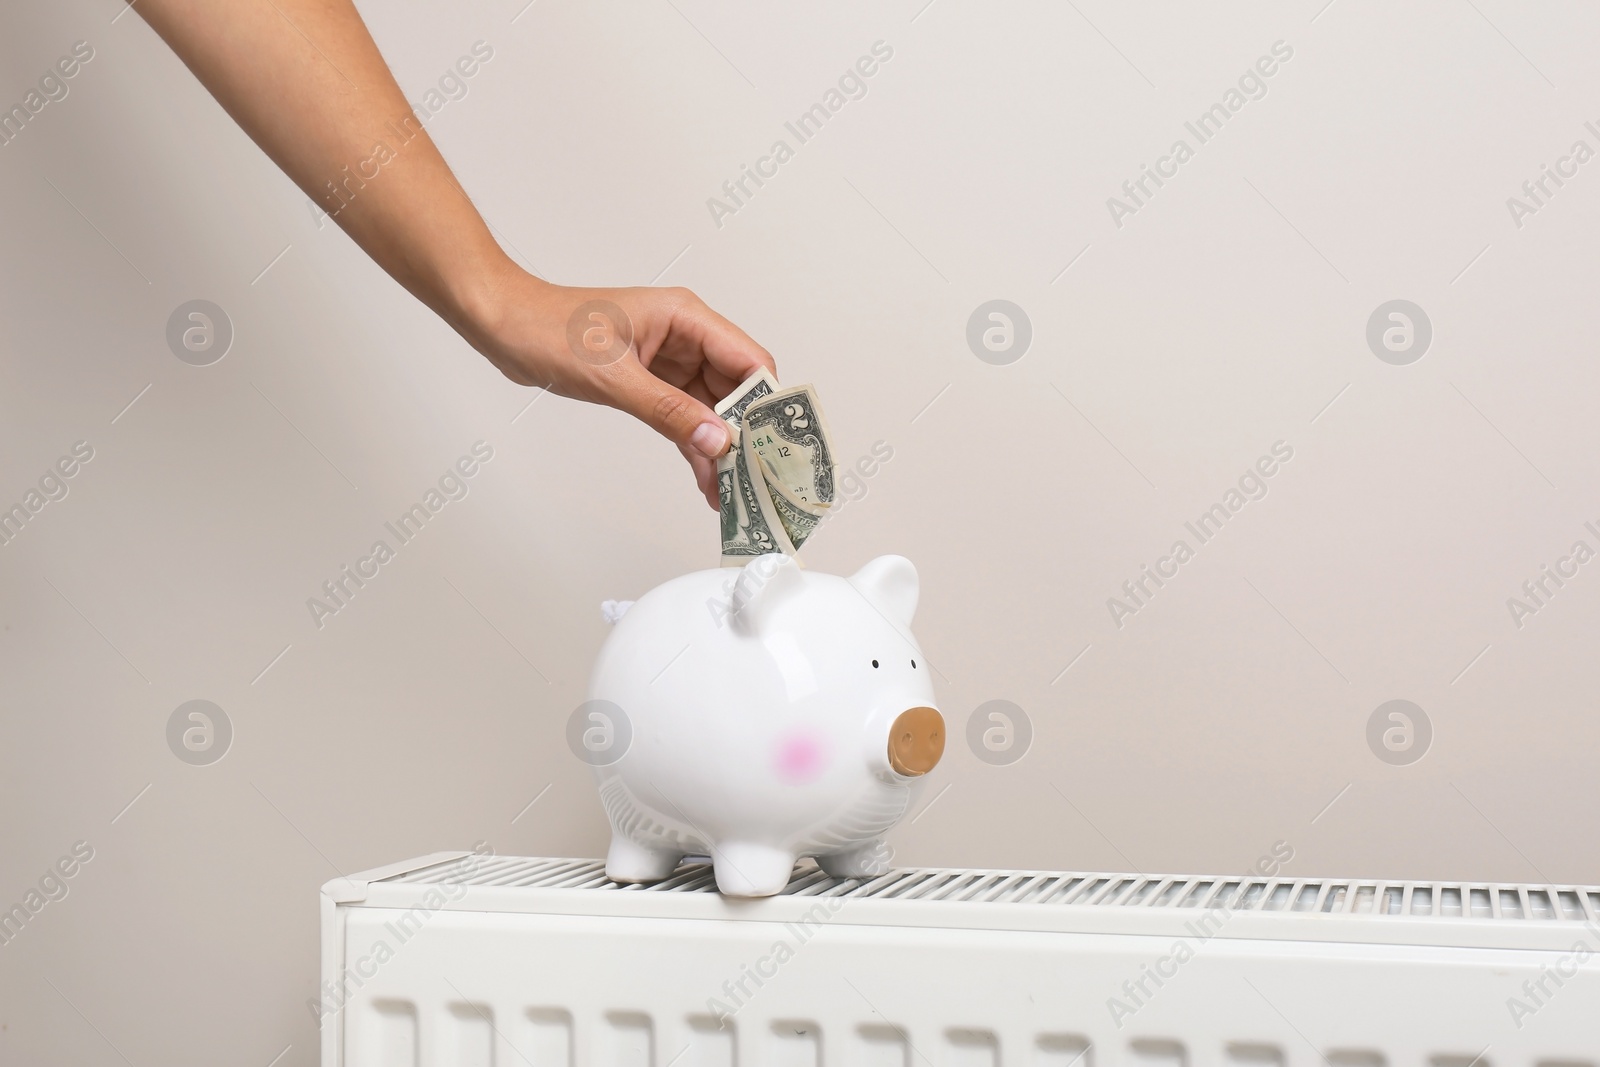 Photo of Woman putting money into piggy bank on heating radiator against light background